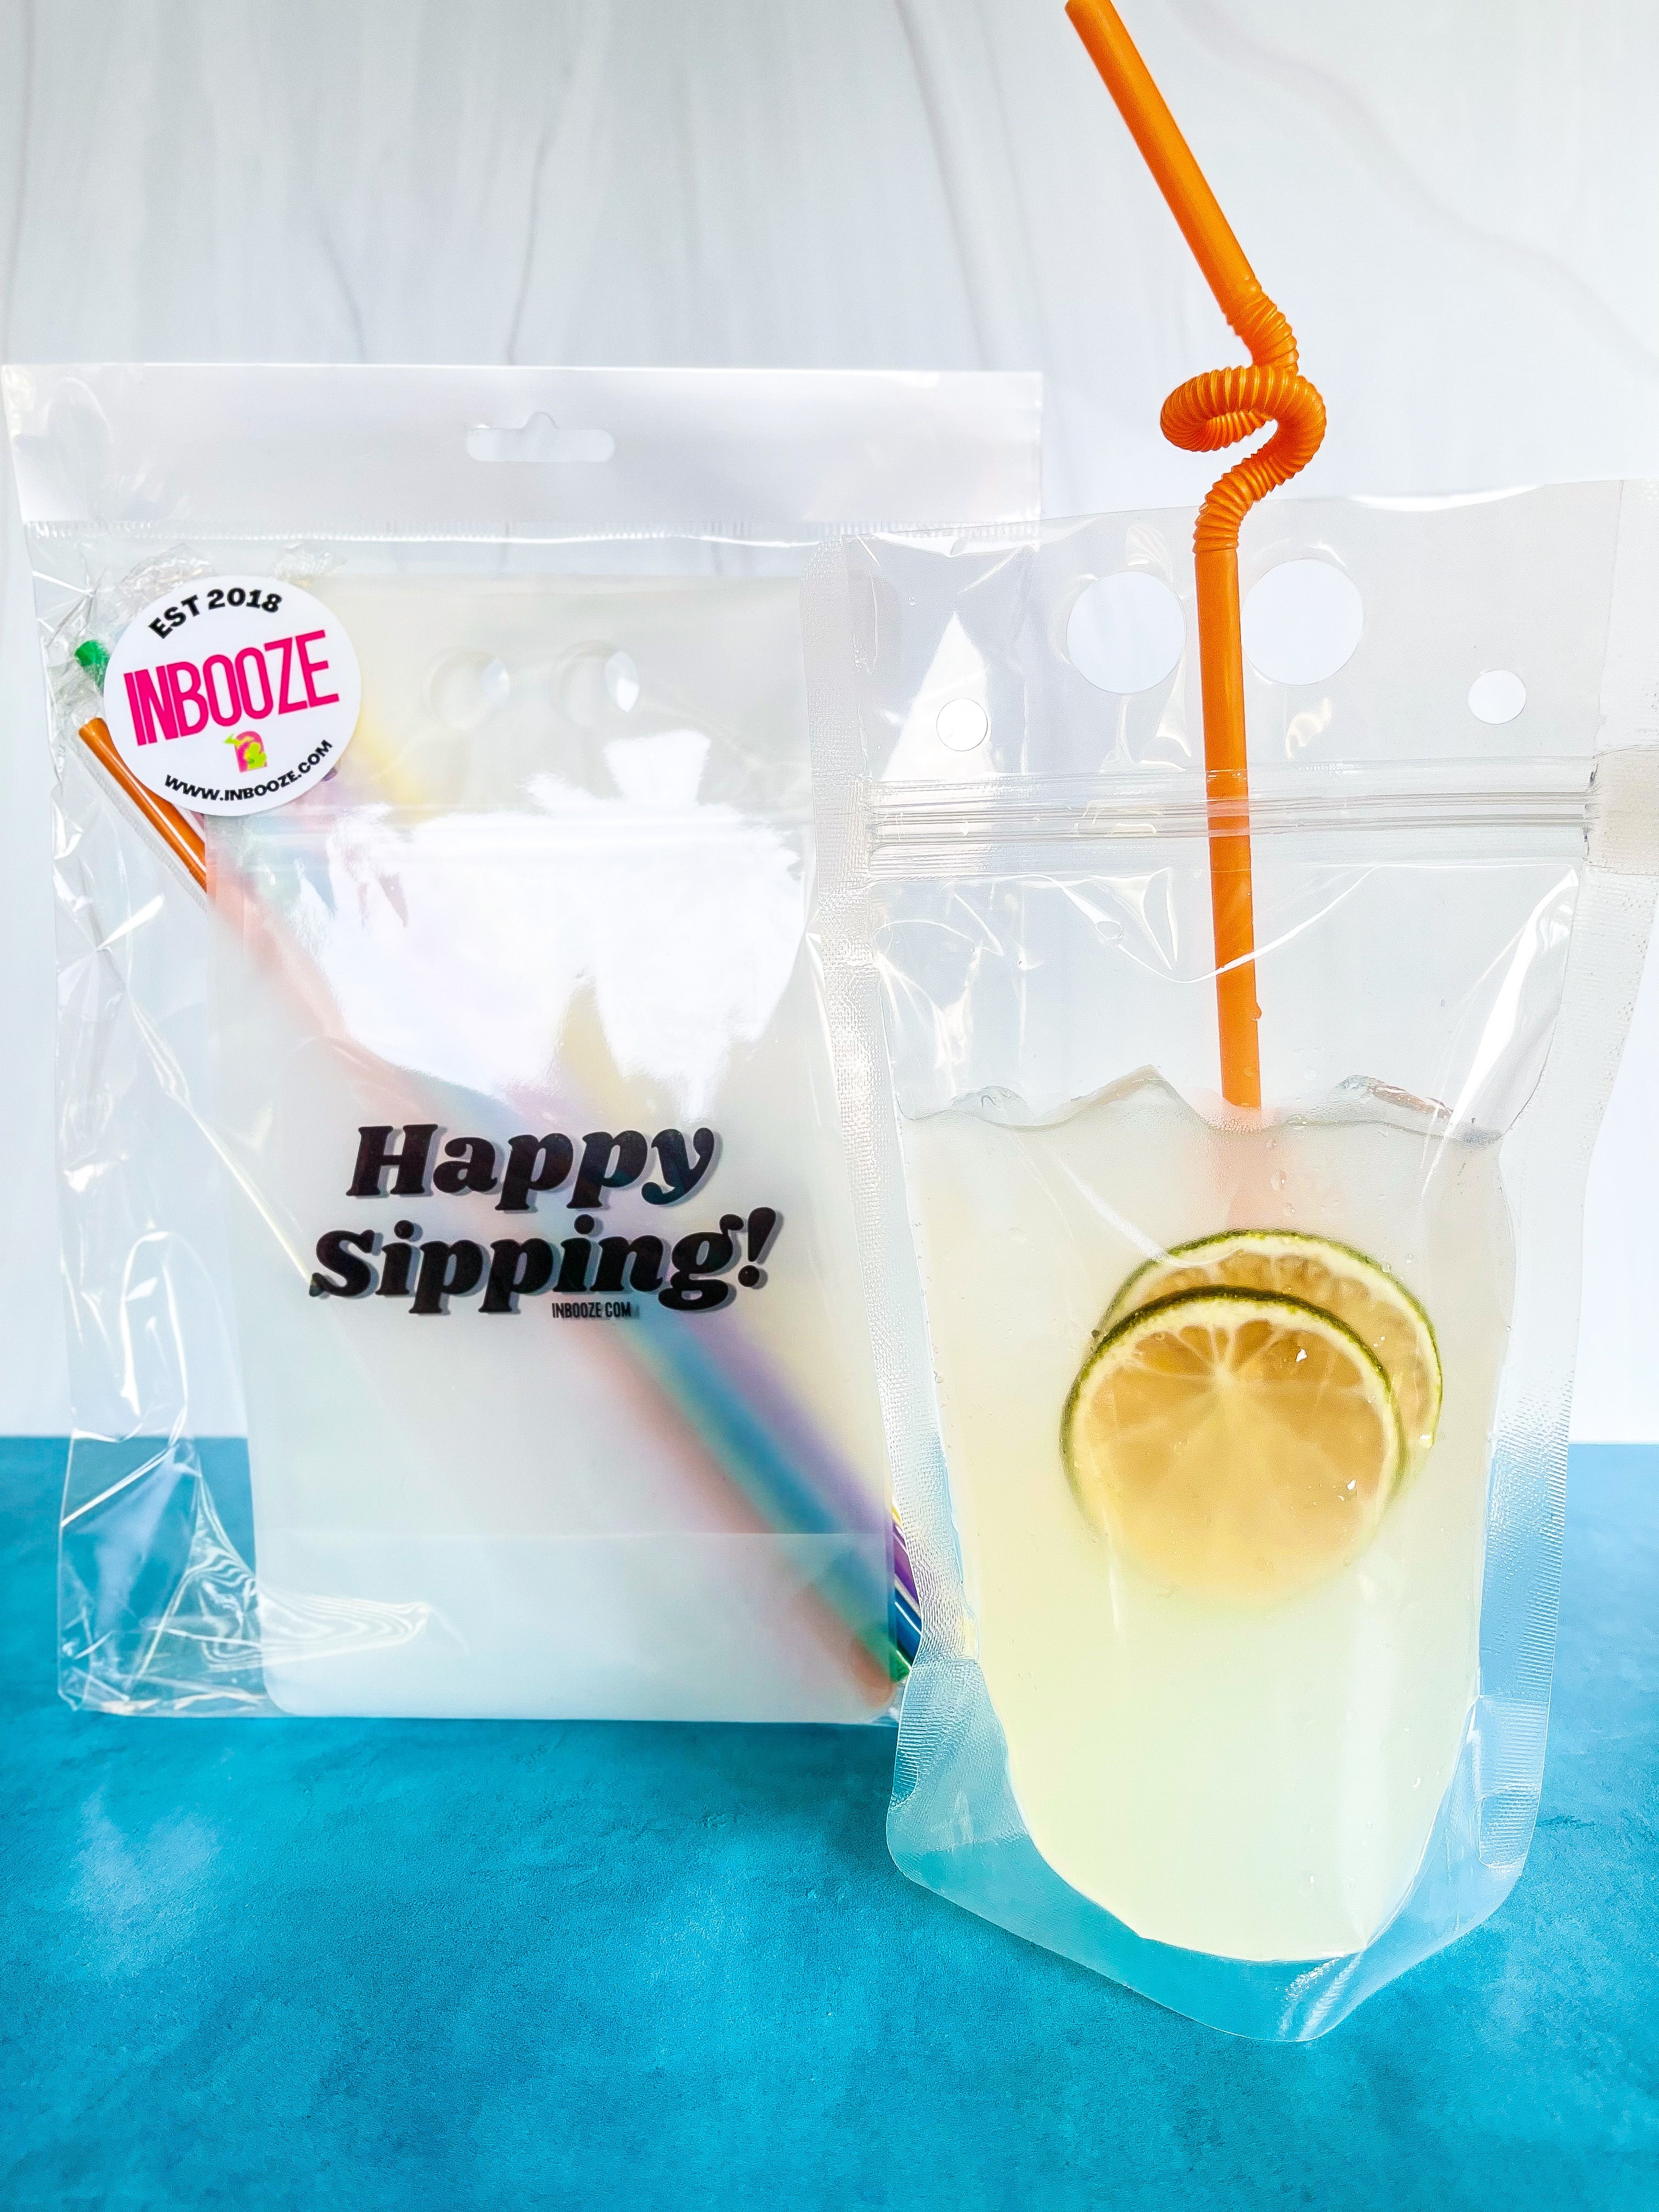 InBooze Adult Capri Sun Drink Pouches - Perfect for girls trips, bachelorette parties and more!